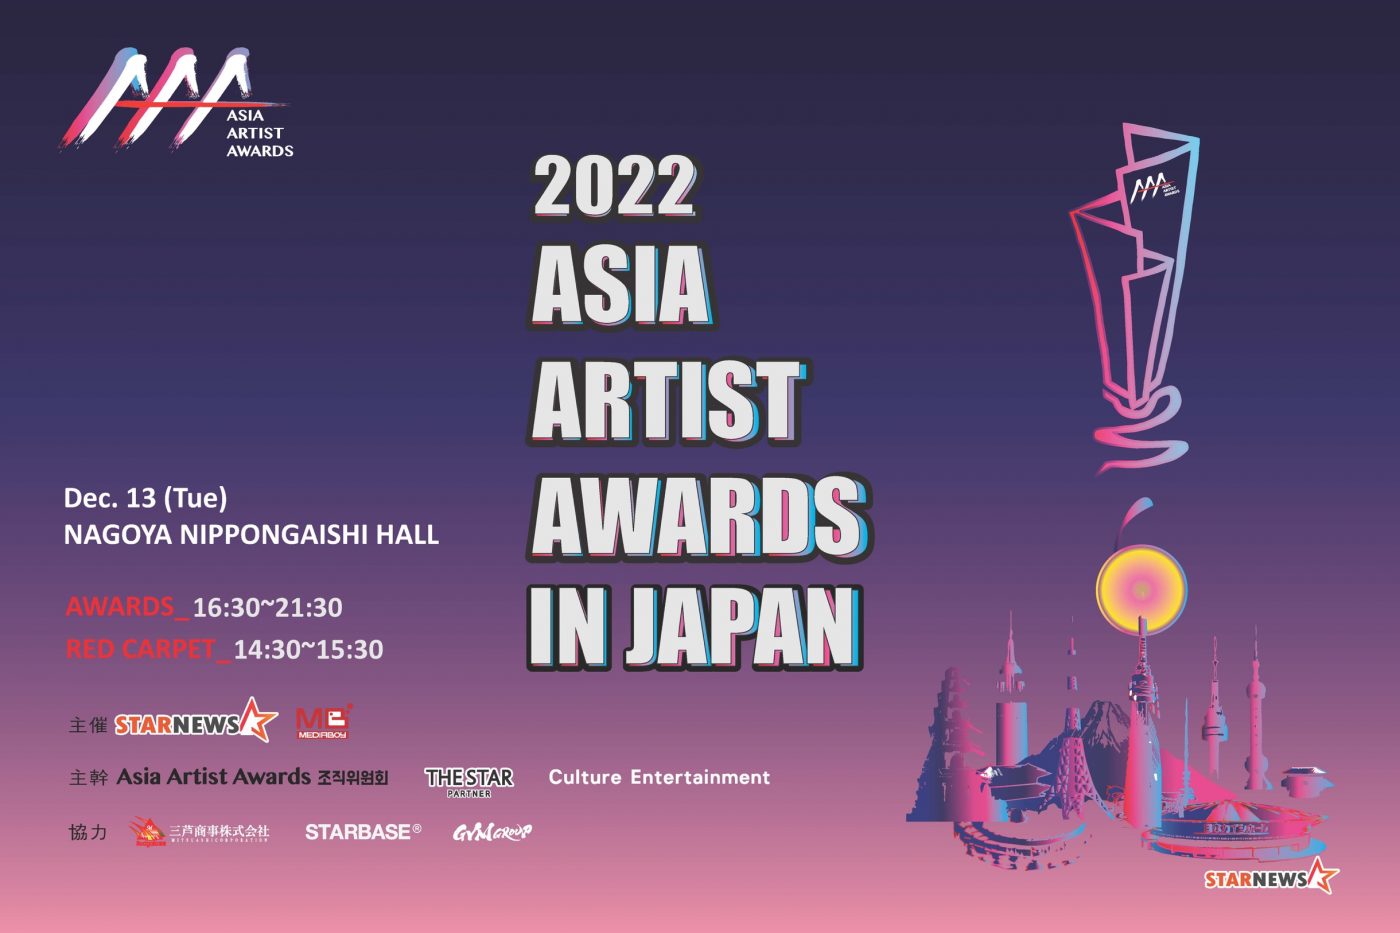 THE RAMPAGE、BE:FIRSTら『Asia Artist Awards in Japan』に出演決定